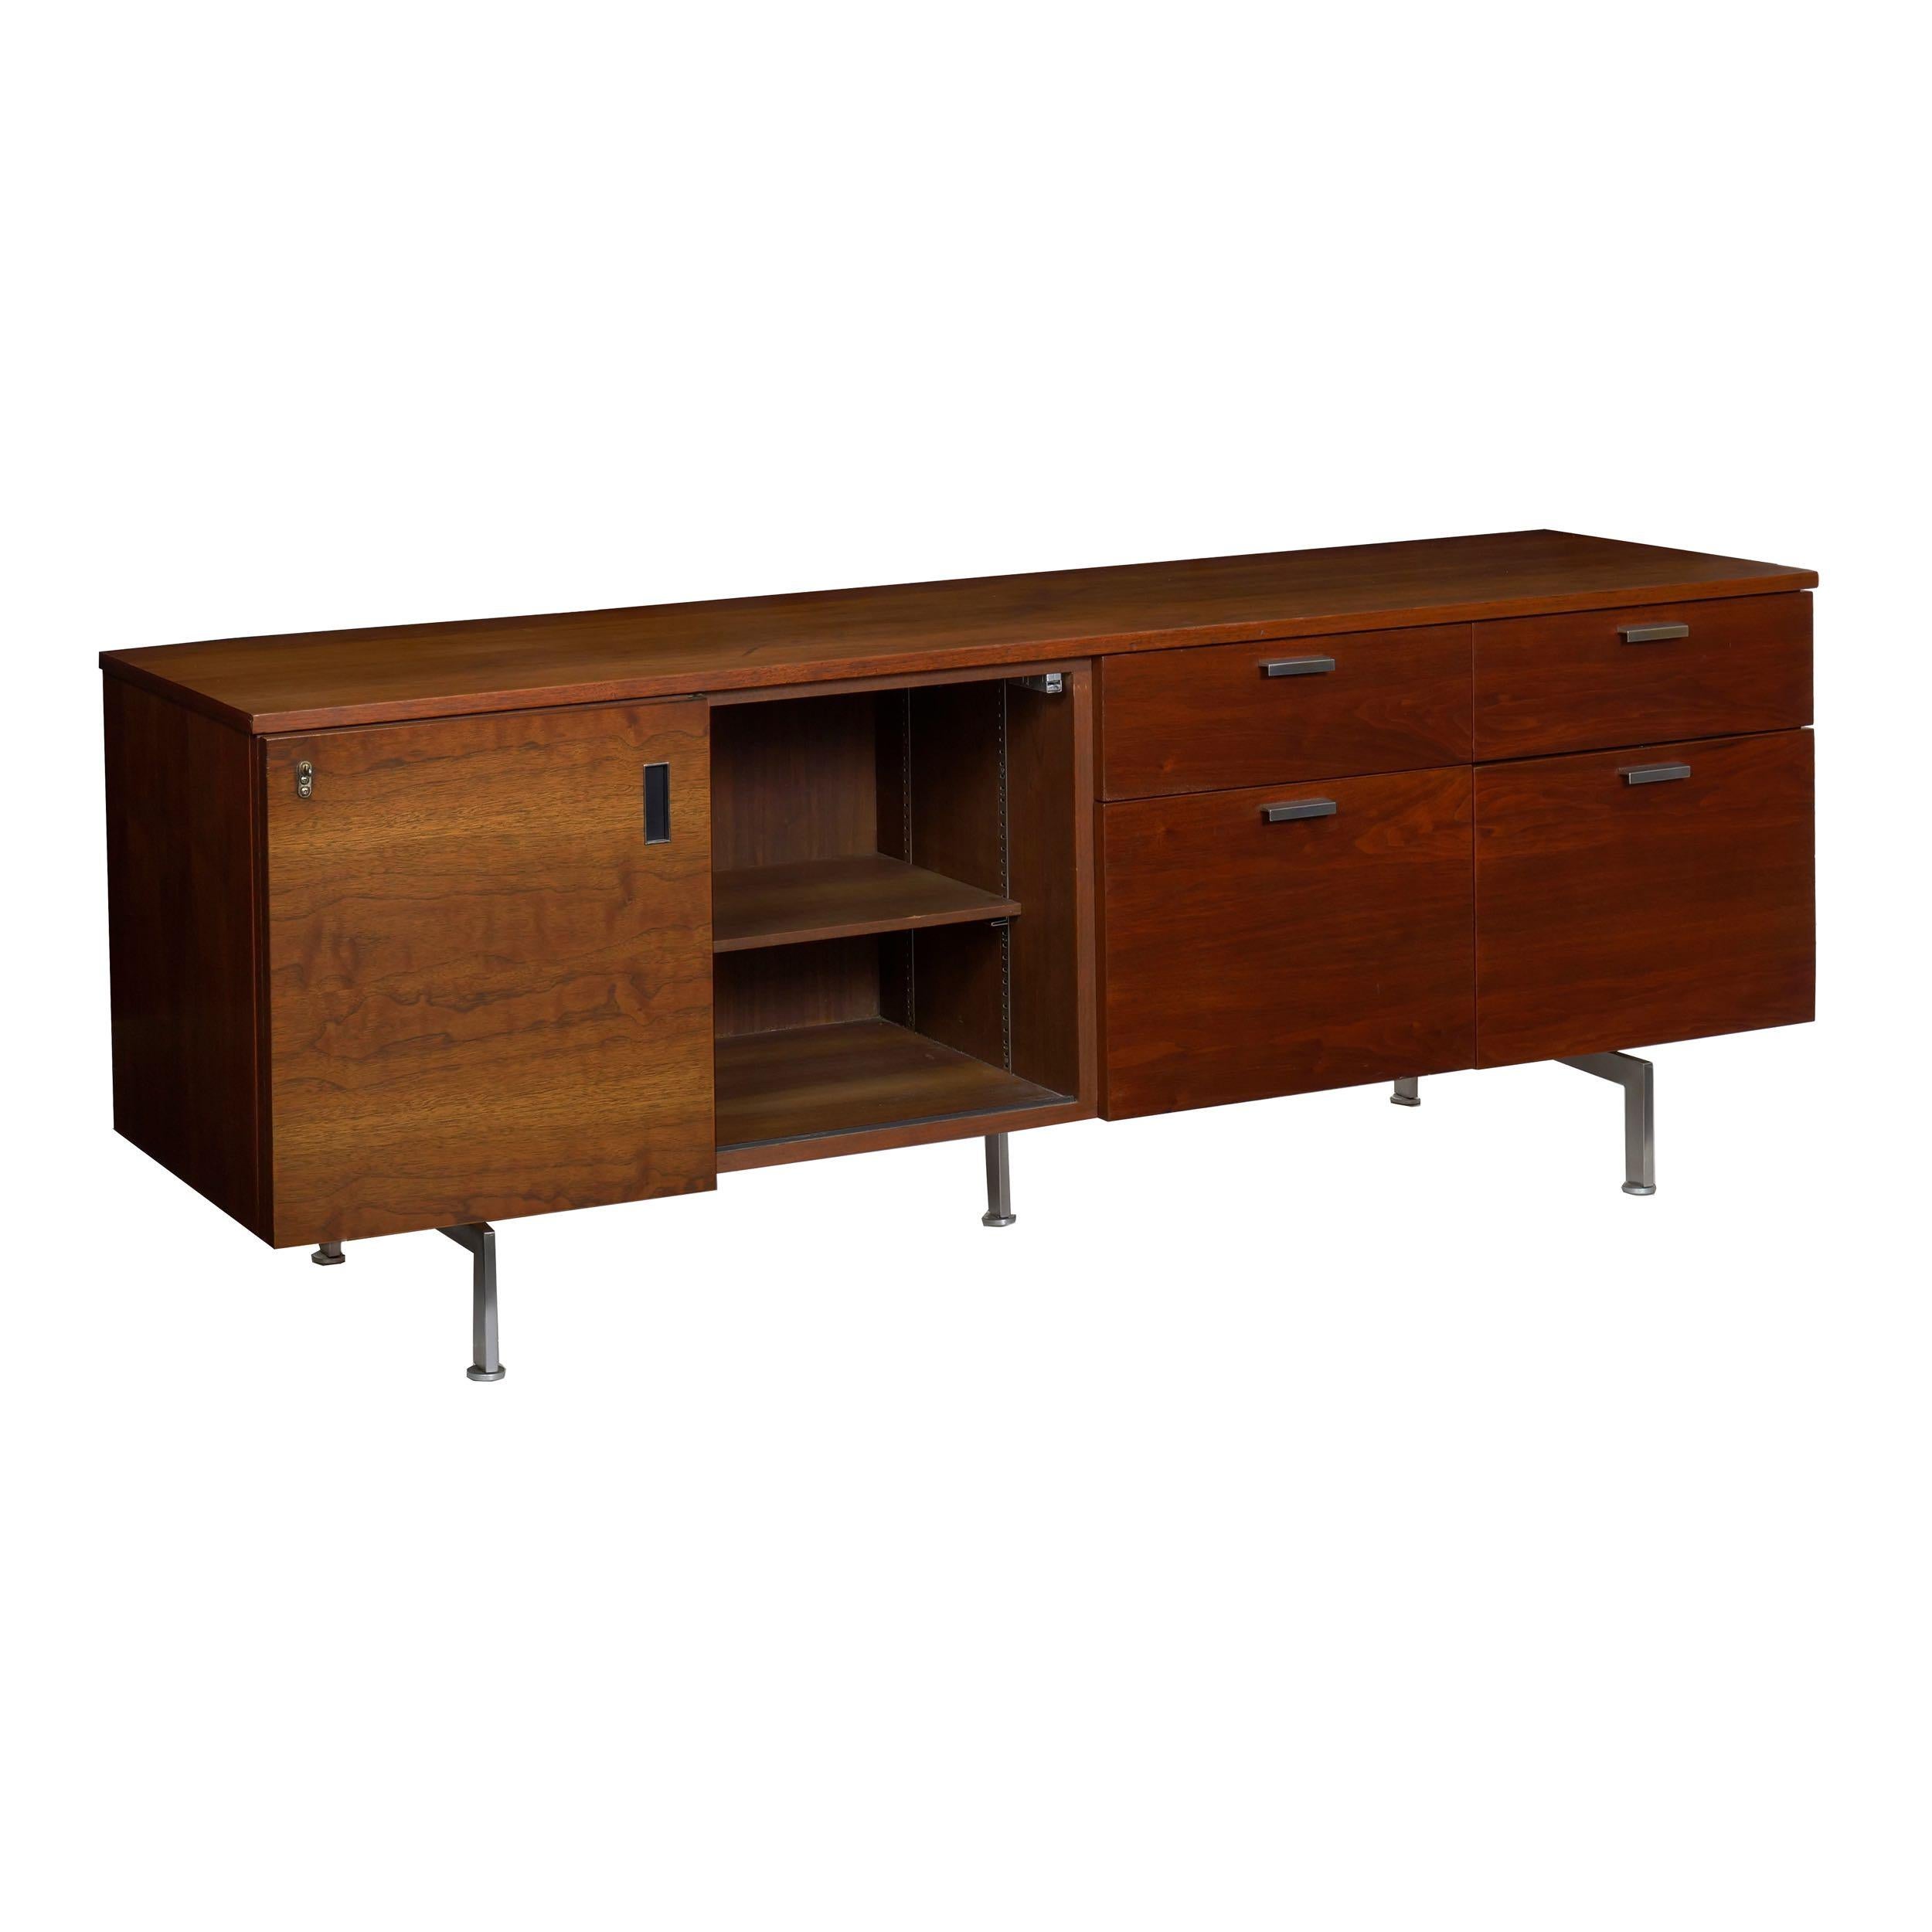 A sleek and interesting credenza that couples organic walnut with its wild chaotic grain against a matte welded steel base and molded pulls, it was designed and executed by the firm of Robert John 